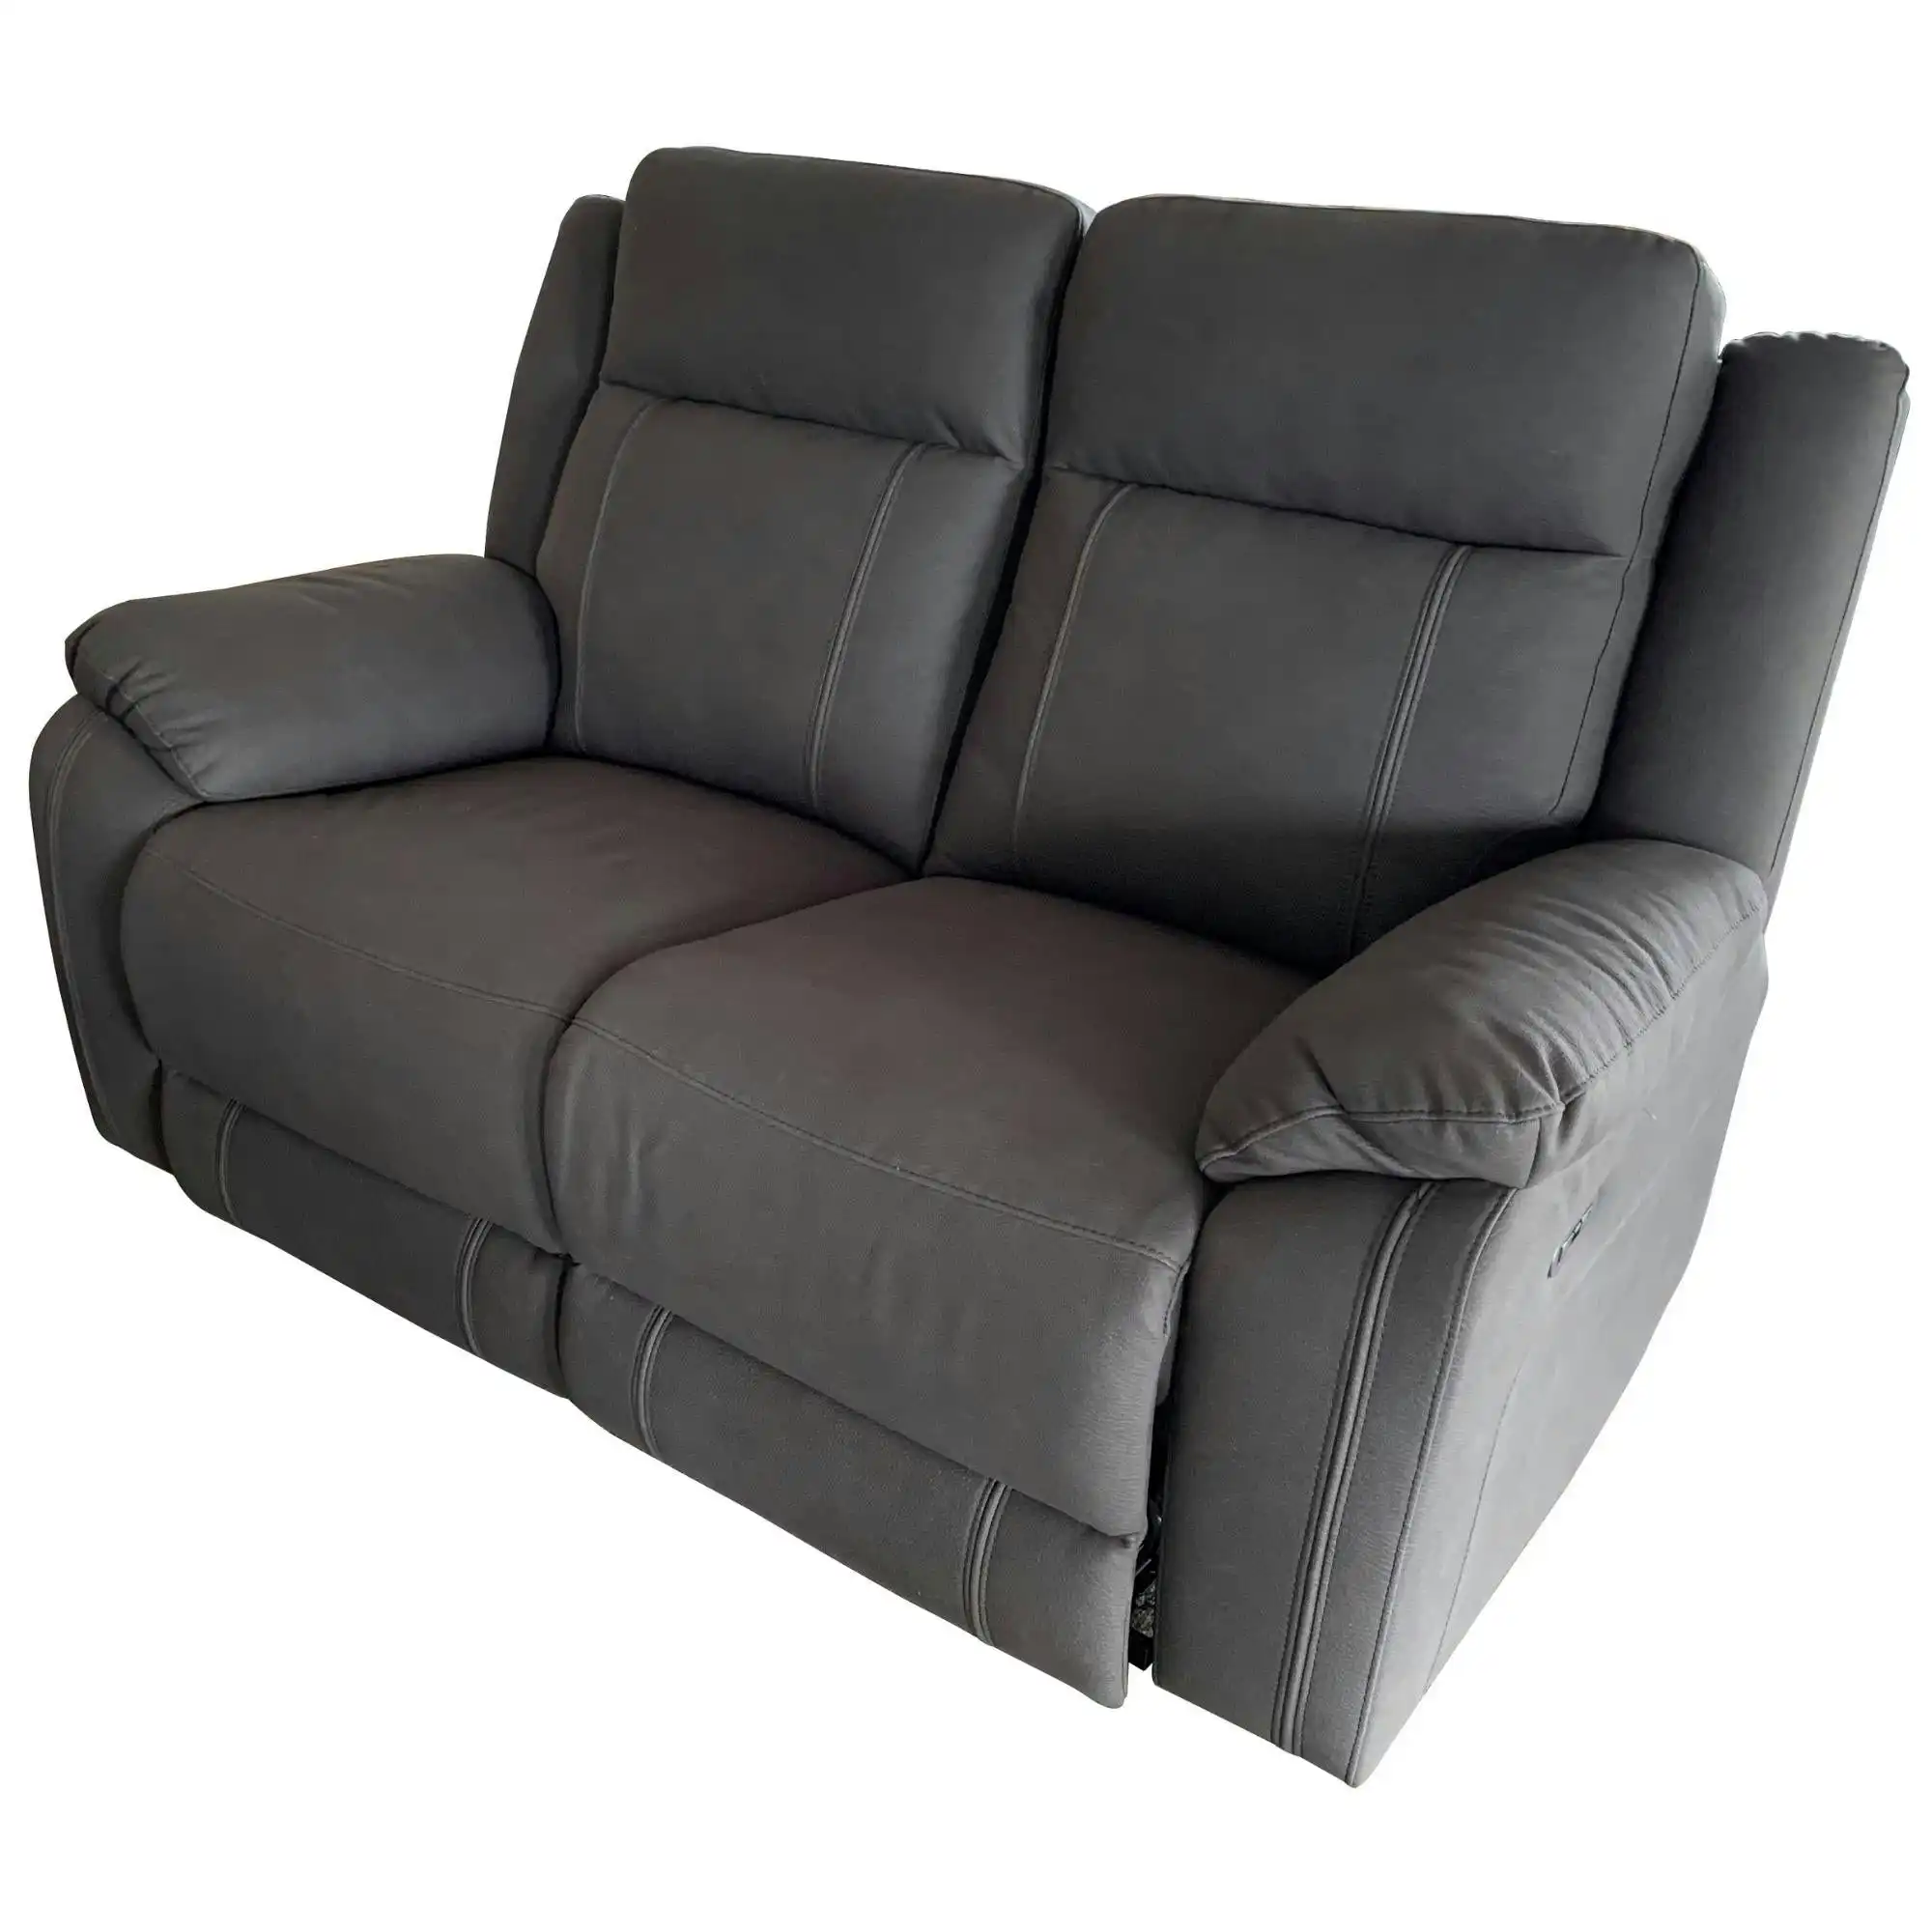 Victor 2 Seater Electric Recliner Sofa Lounge Grey